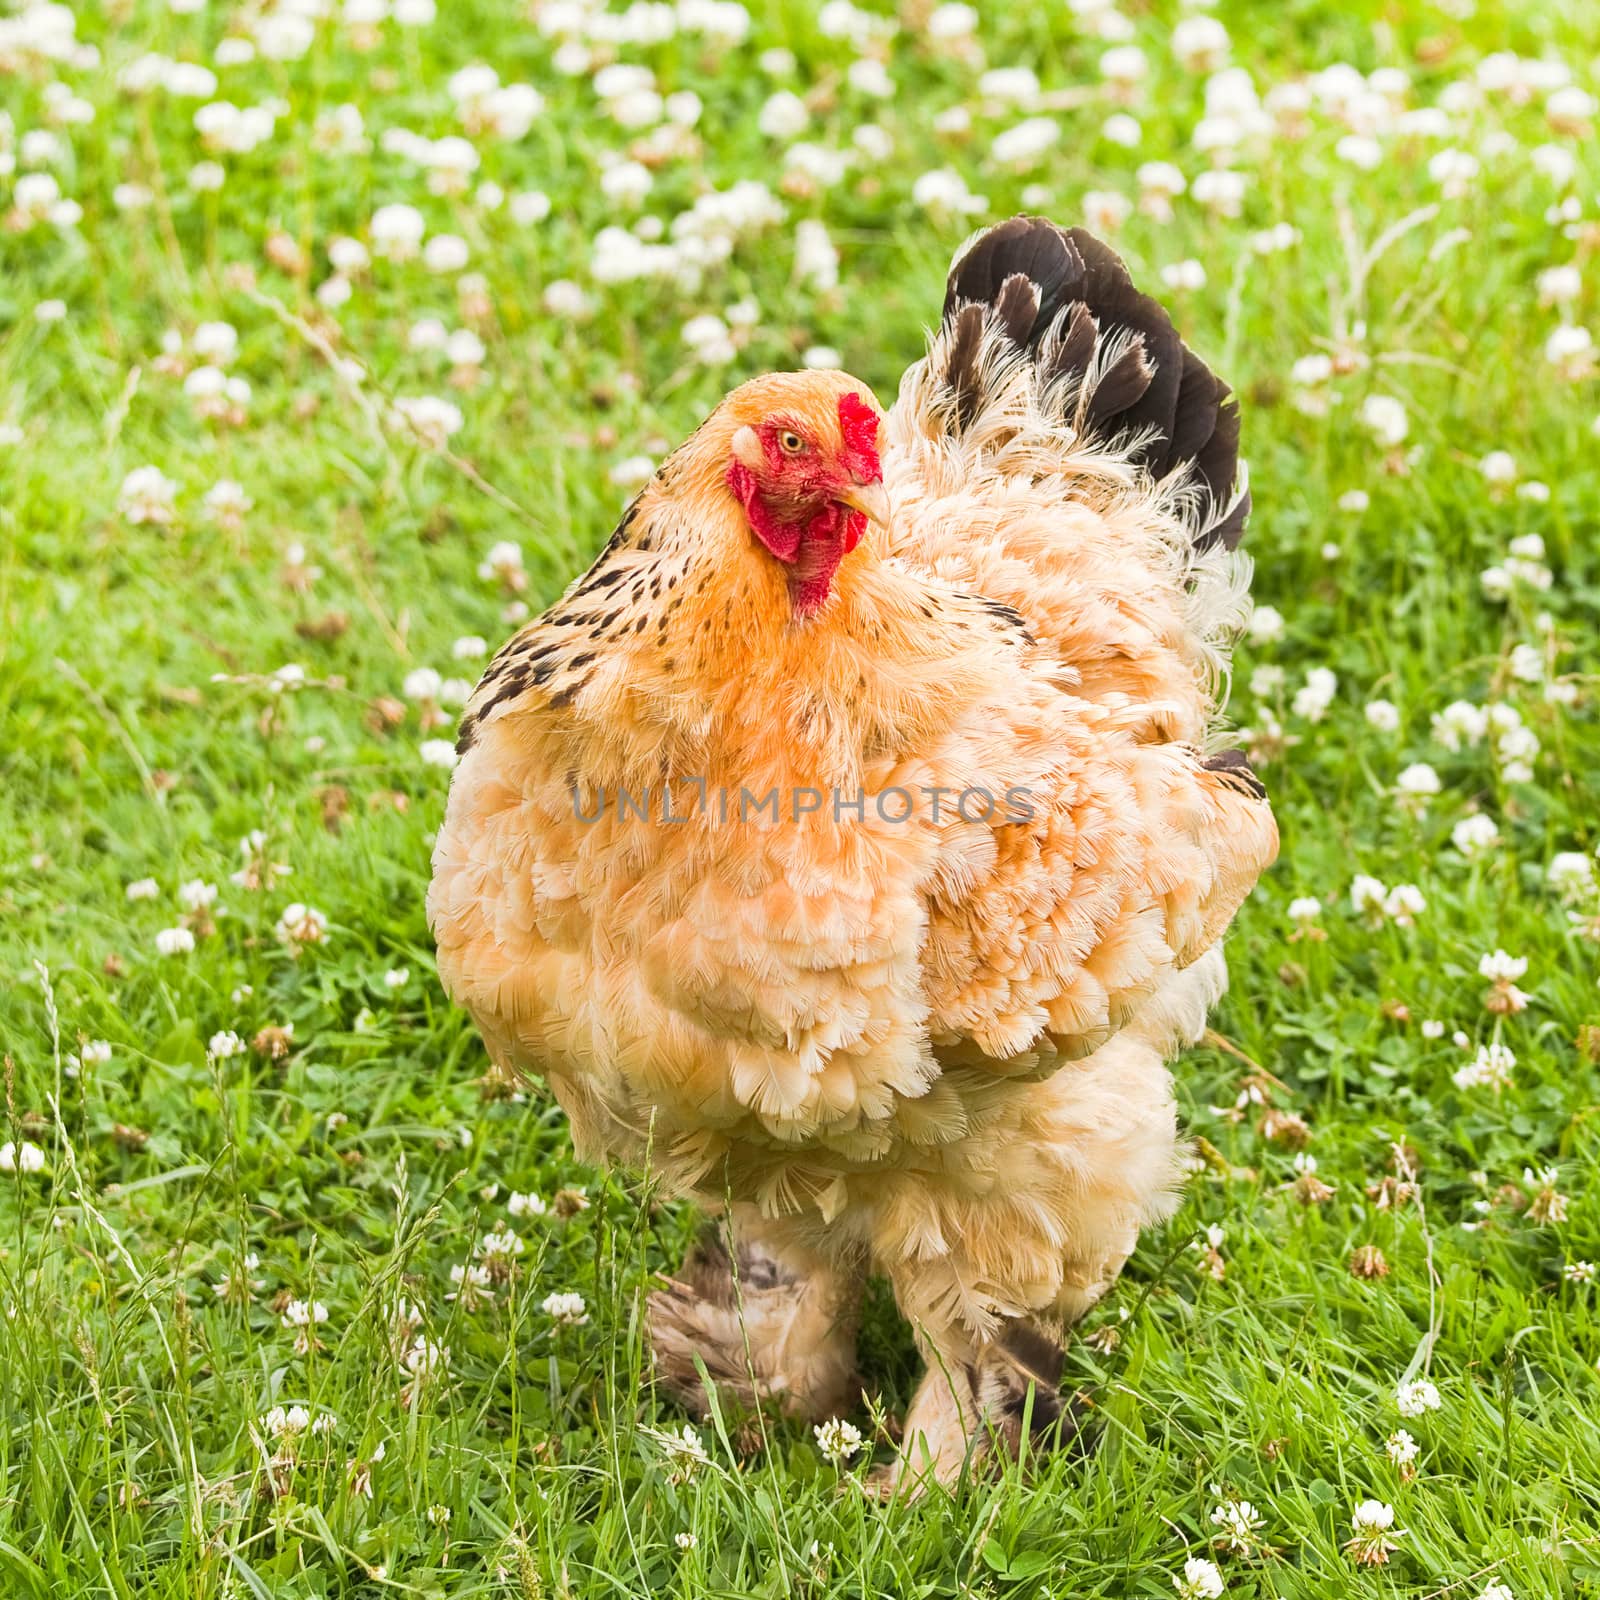 Decorative chicken in field with clover flowers by Colette